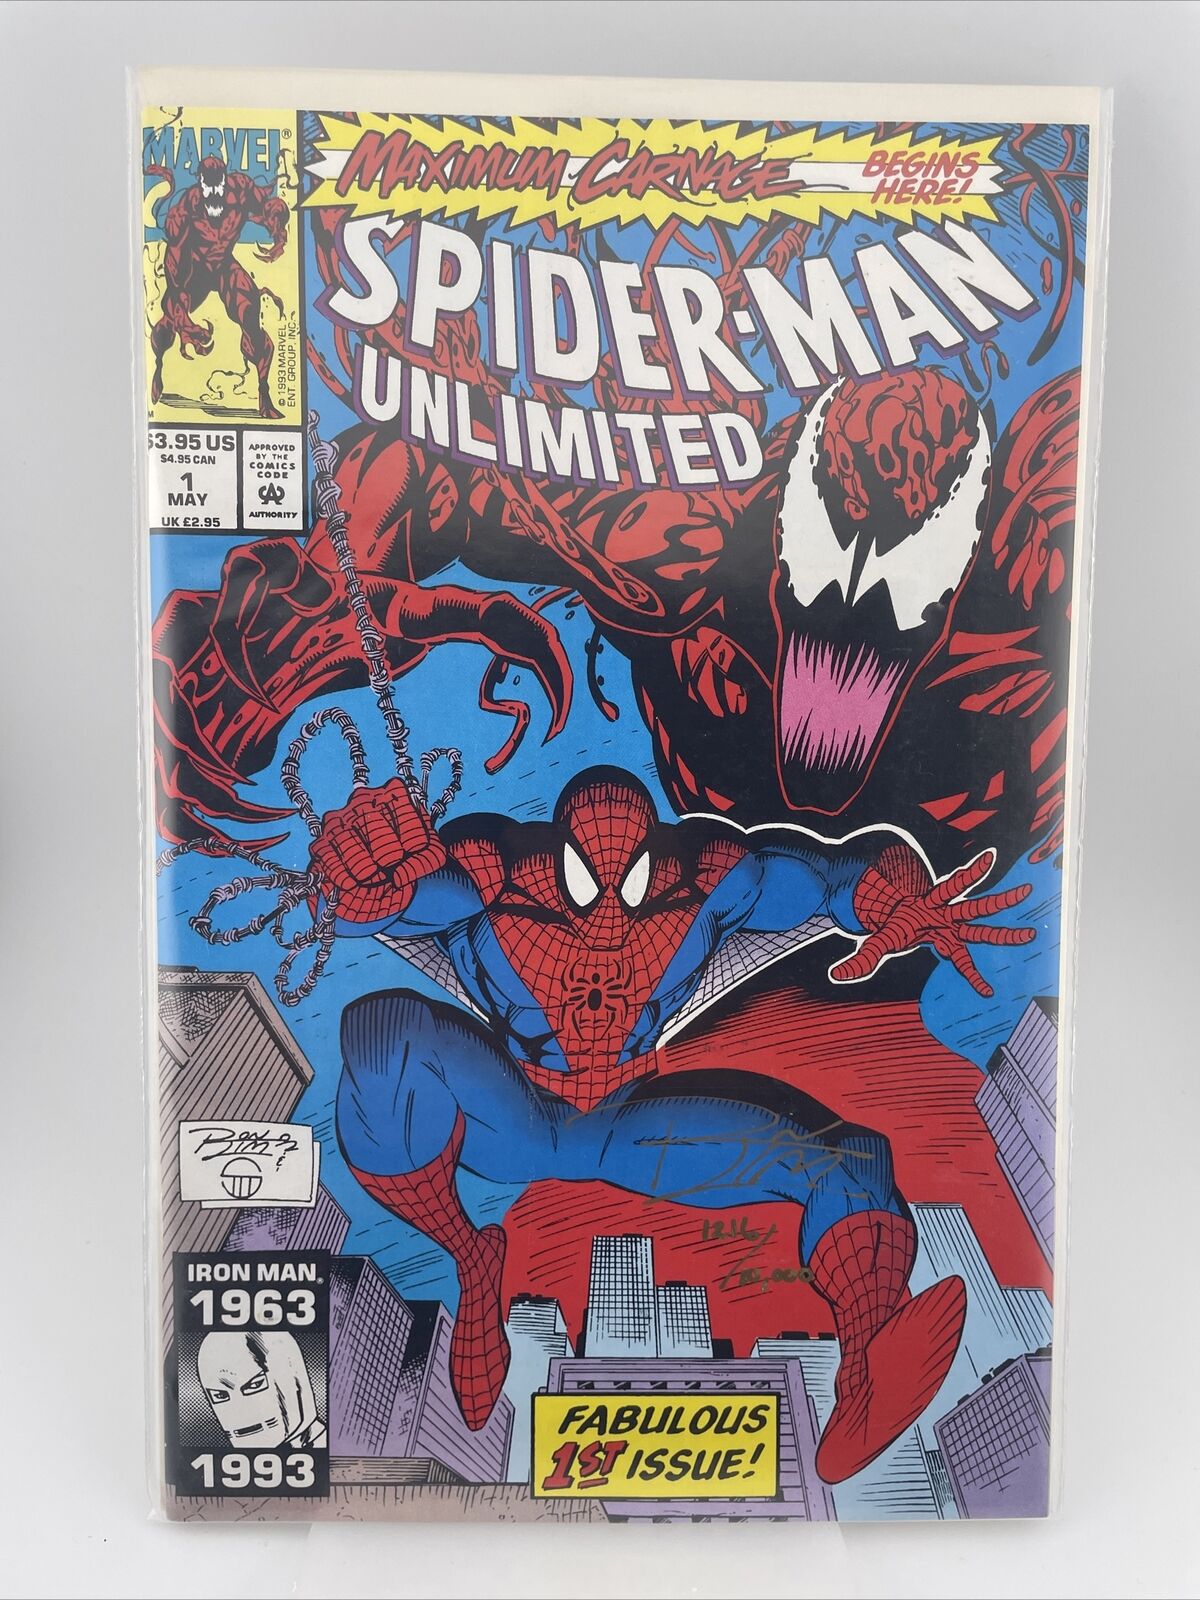 Spider-Man Unlimited #1: Signed Ron Lim w/ COA